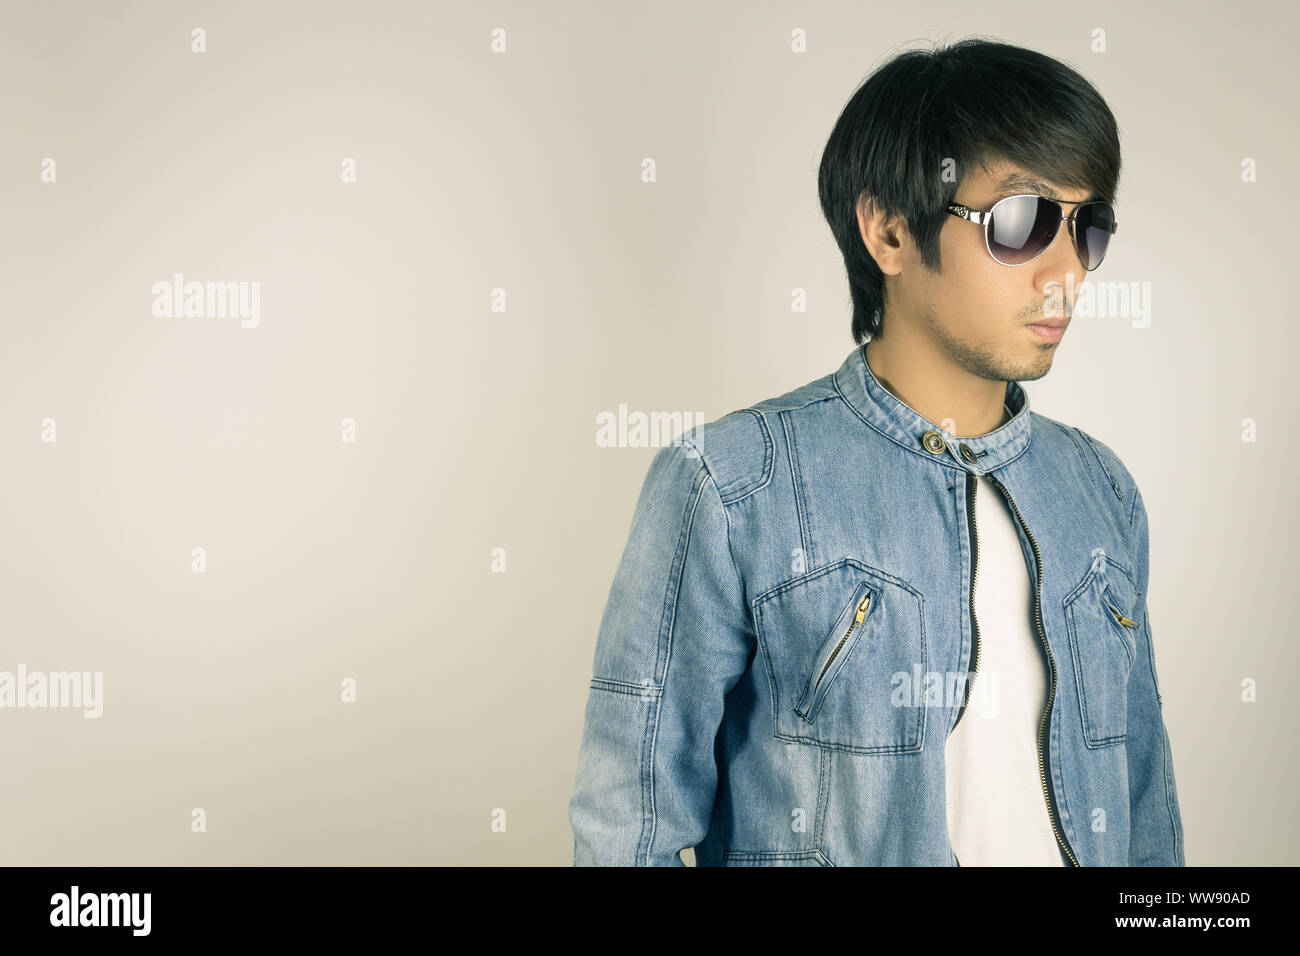 Young Asian Man In Jeans Jacket Or Denim Jacket Wear Sunglasses At Right Frame Denim Or Jeans Jacket Men Fashion On Gray Background Stock Photo Alamy